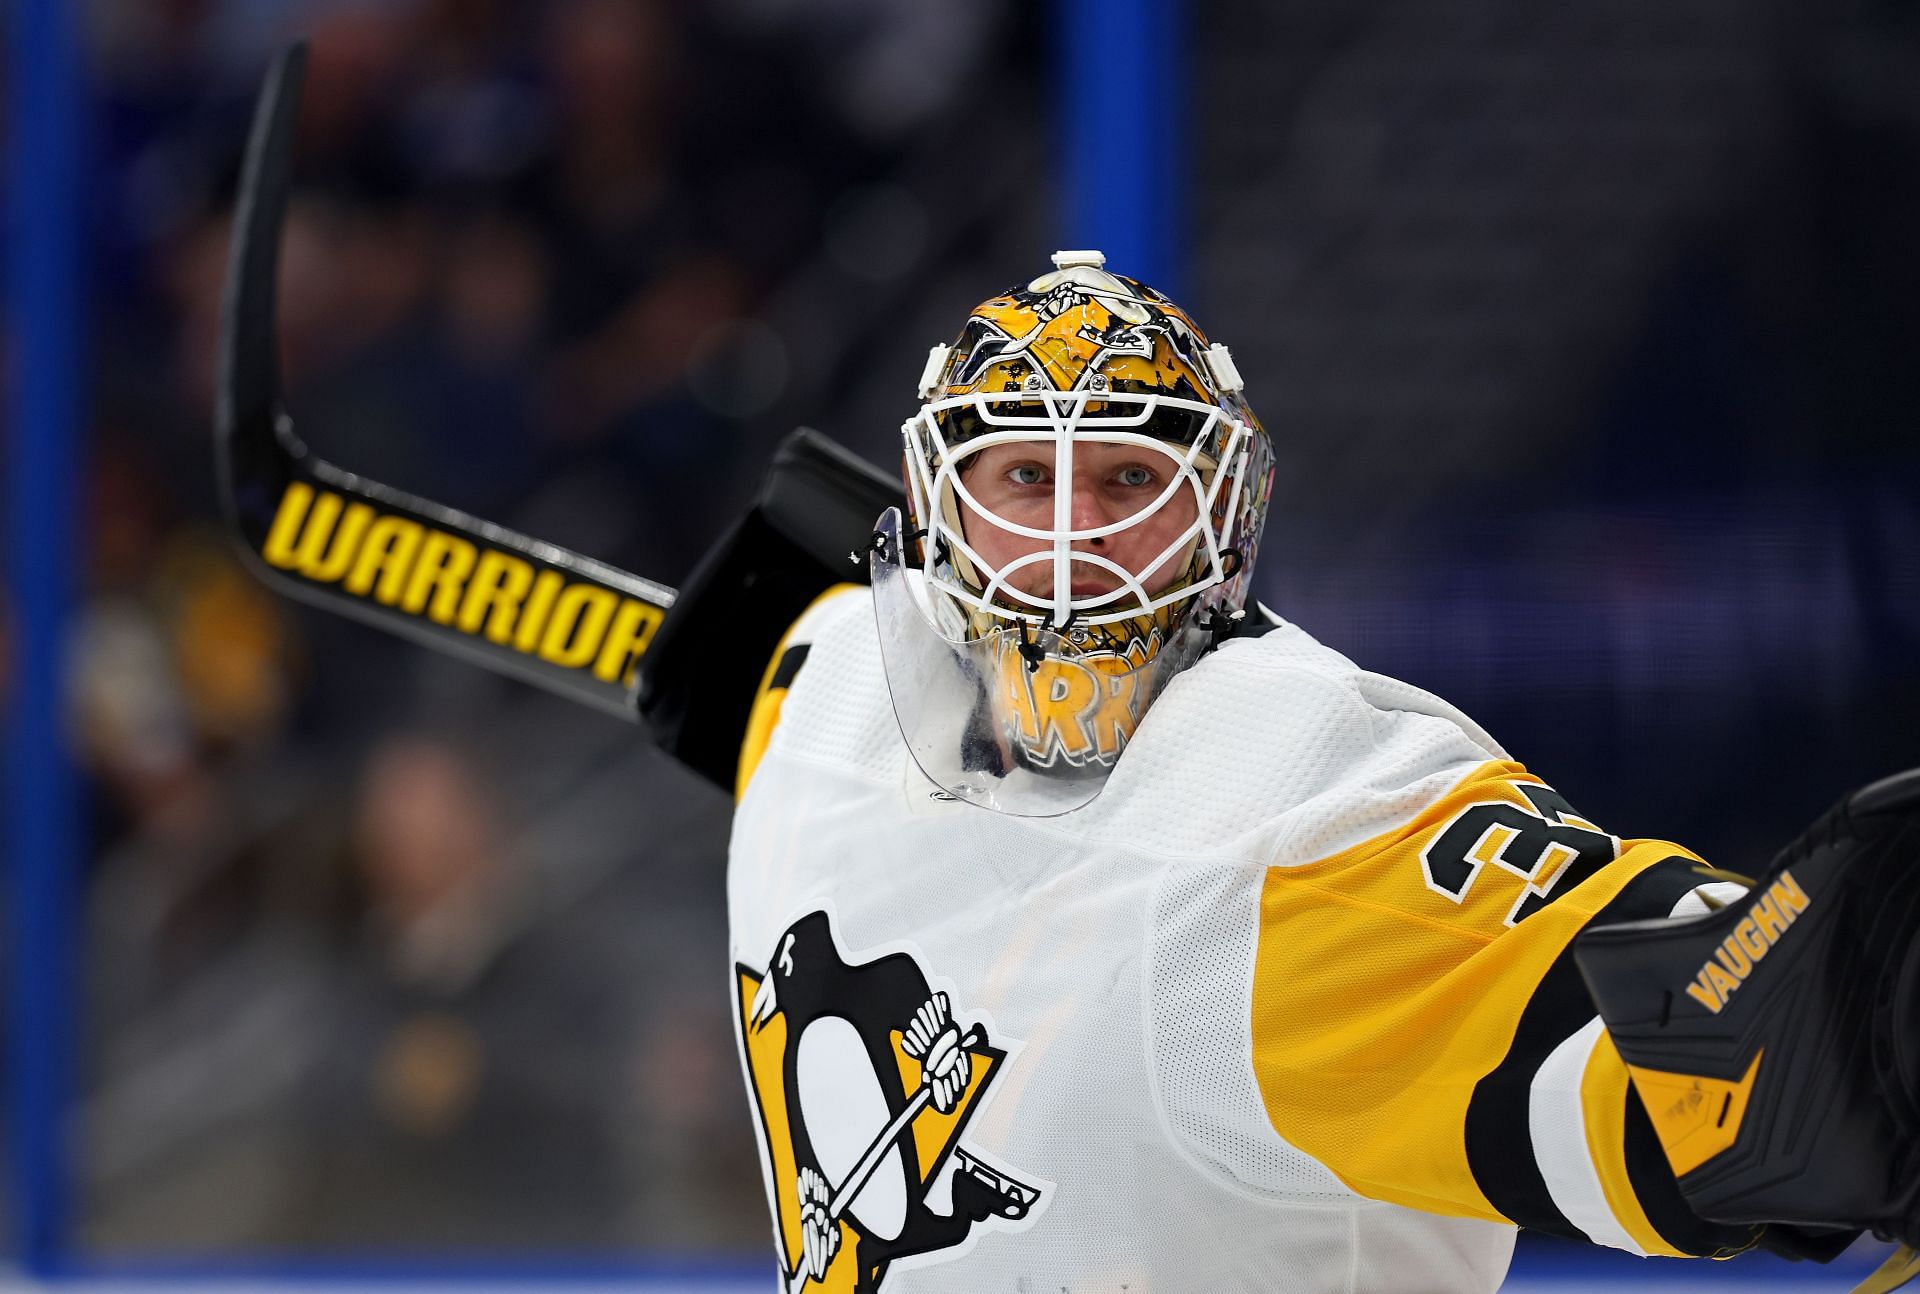 Can the Pittsburgh Penguins make the NHL playoffs? Analyzing their